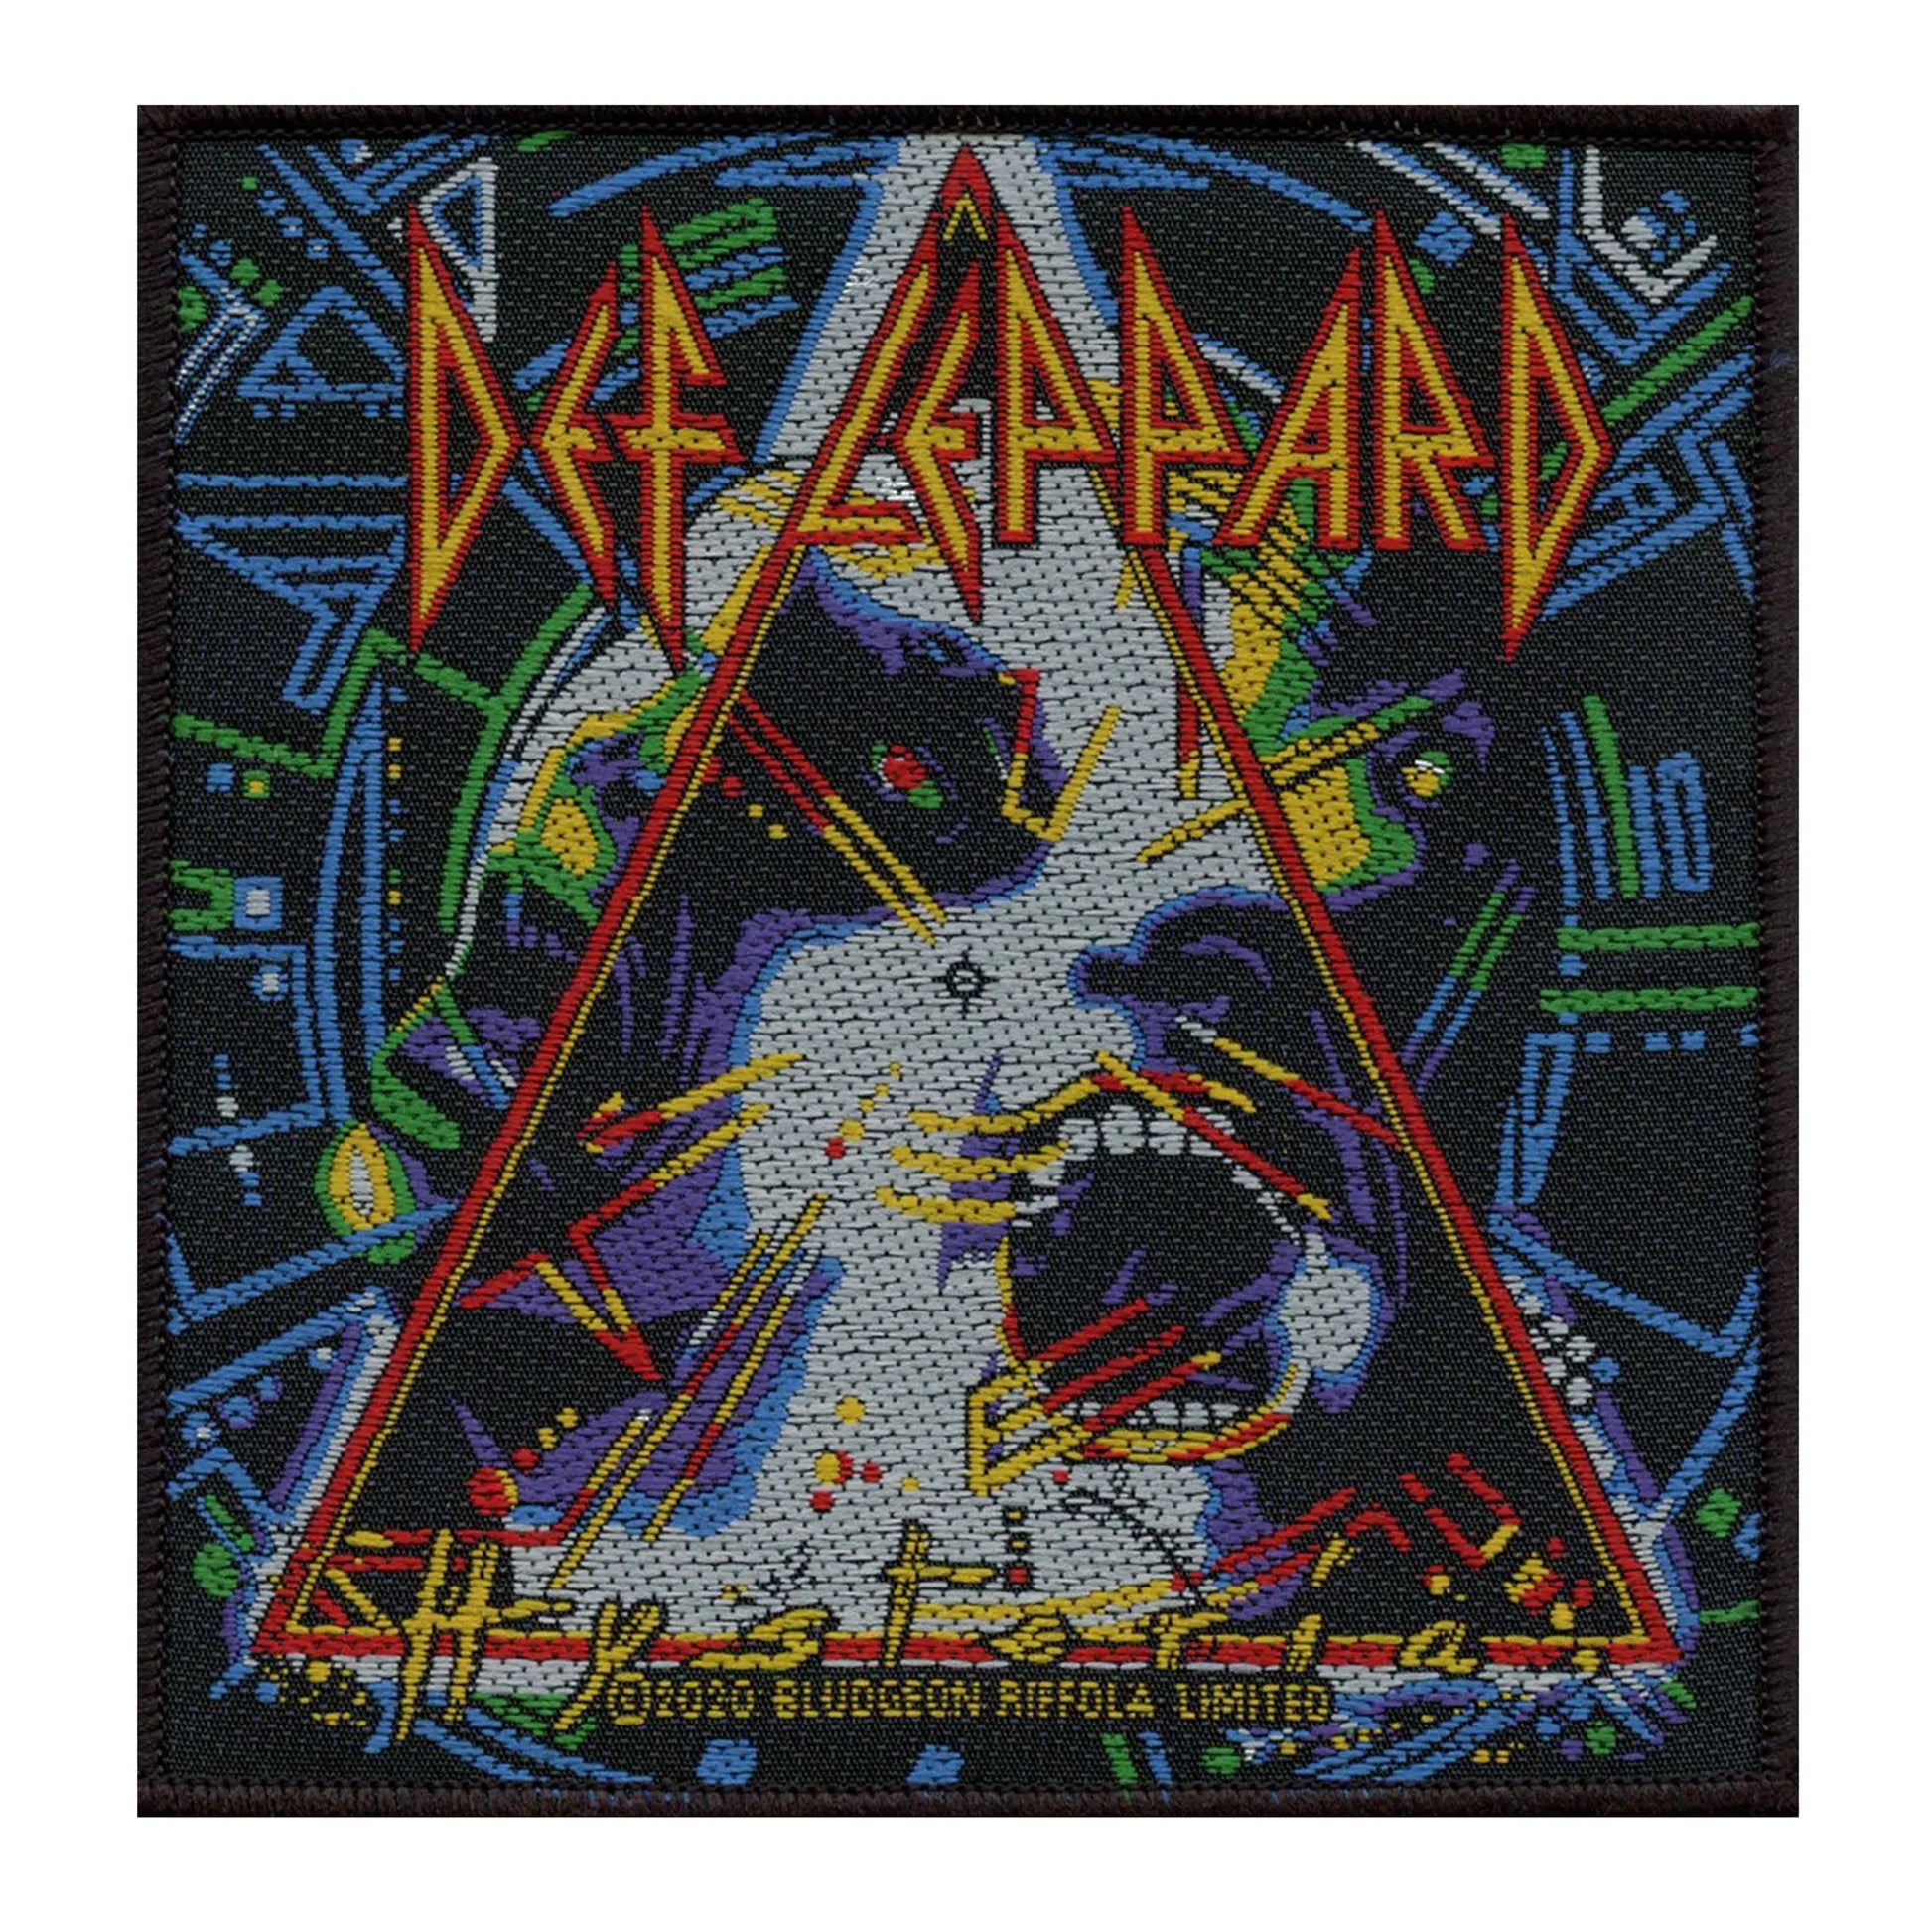 Def Leppard Hysteria Patch English Rock Band Woven Iron On